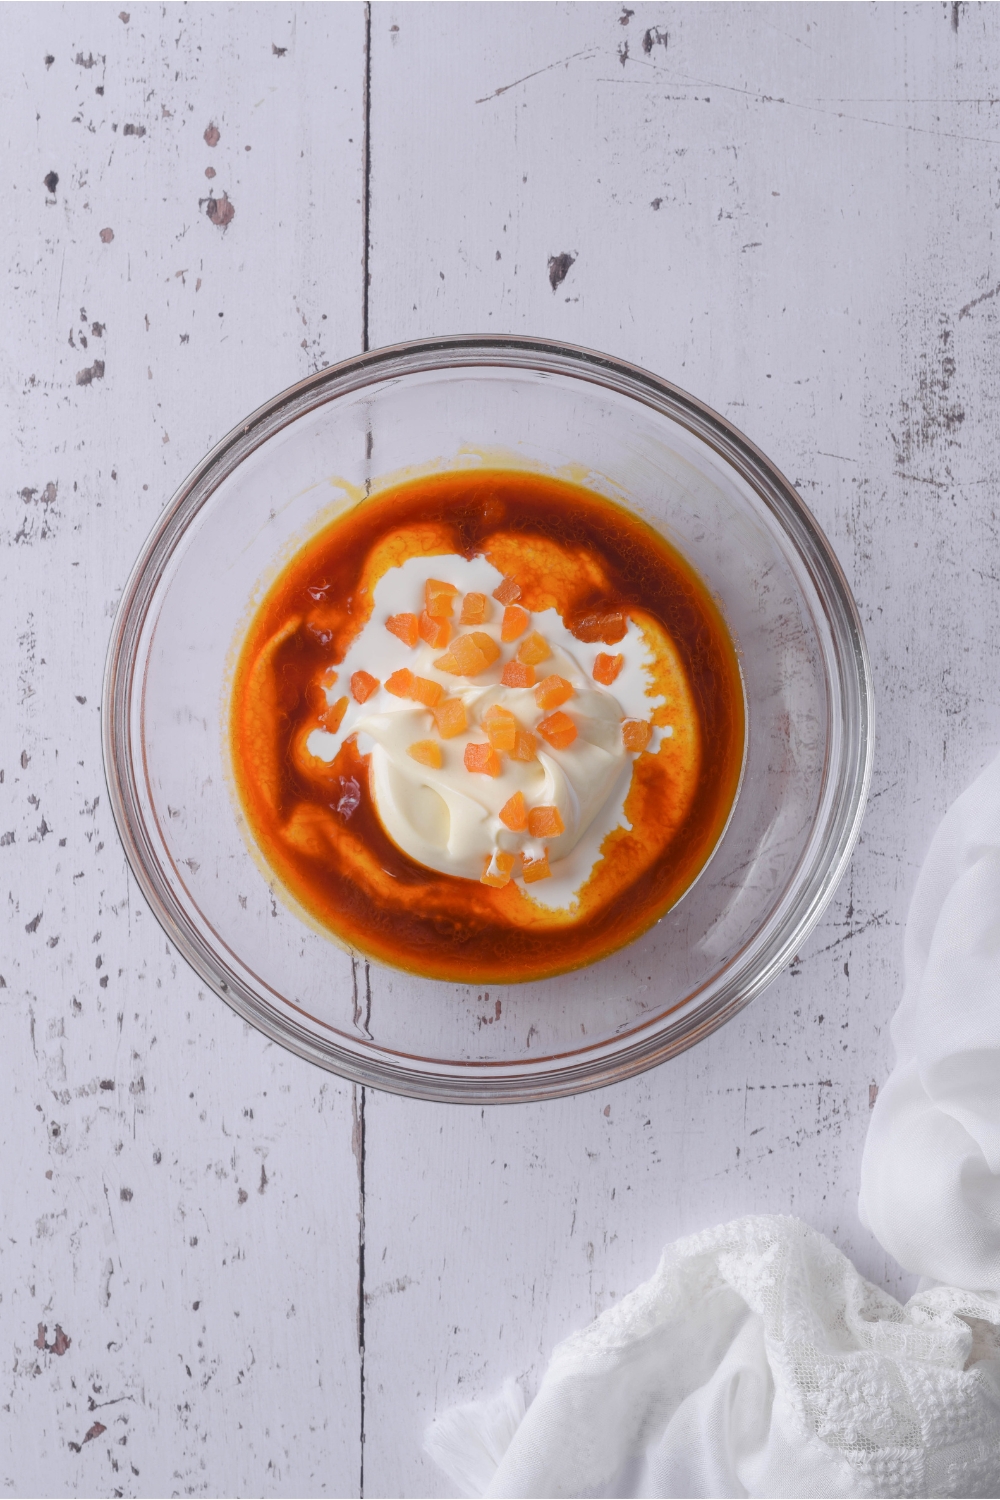 A clear bowl with mayonnaise, creme fraiche, a red sauce mixture, and diced apricots. The ingredients have not yet been mixed together.